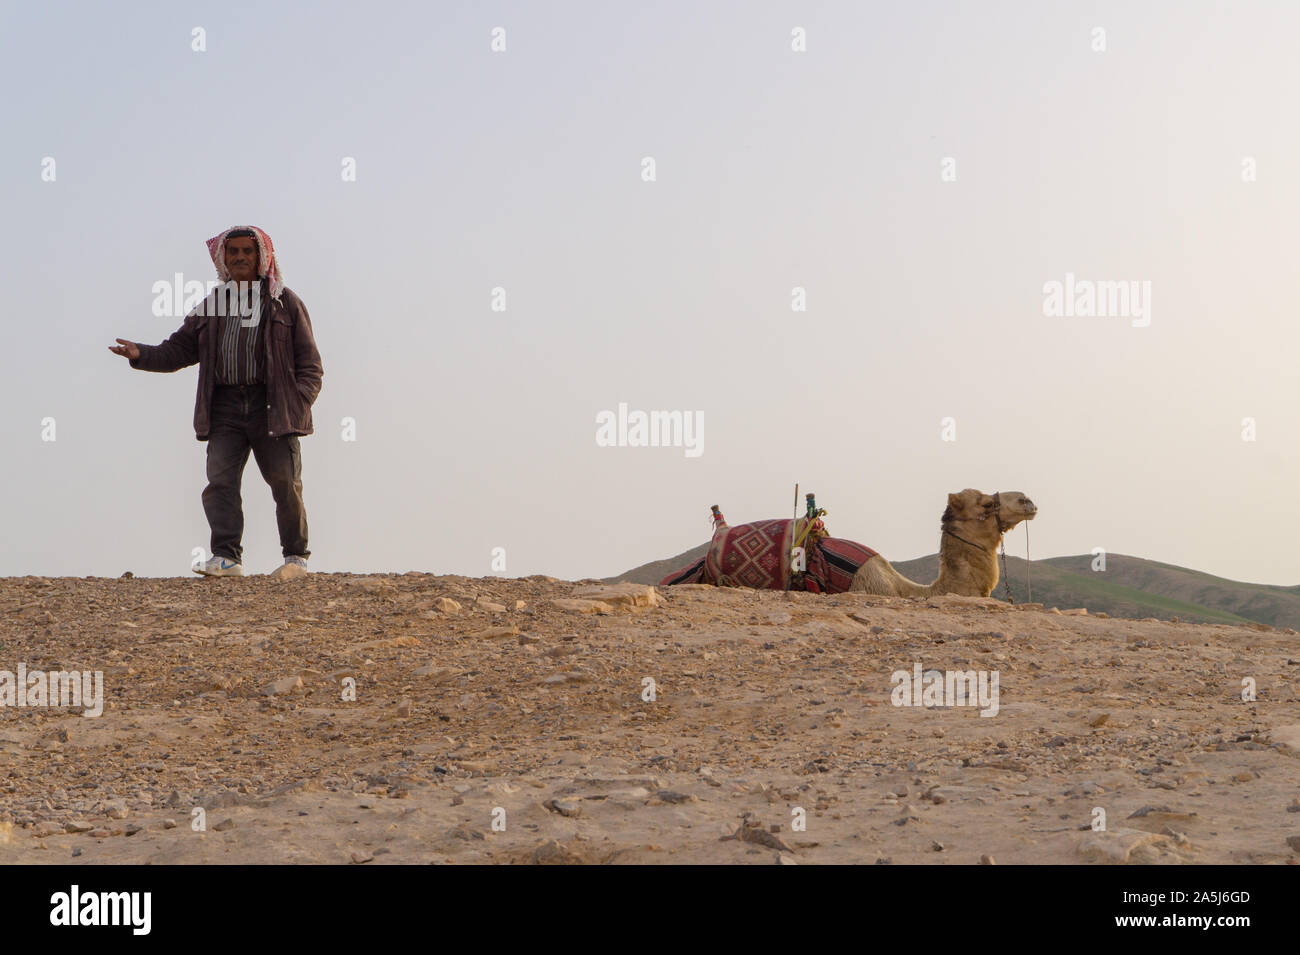 Judean desert, Israel- February 26, 2018: a Bedouin with a camel in the desert Stock Photo